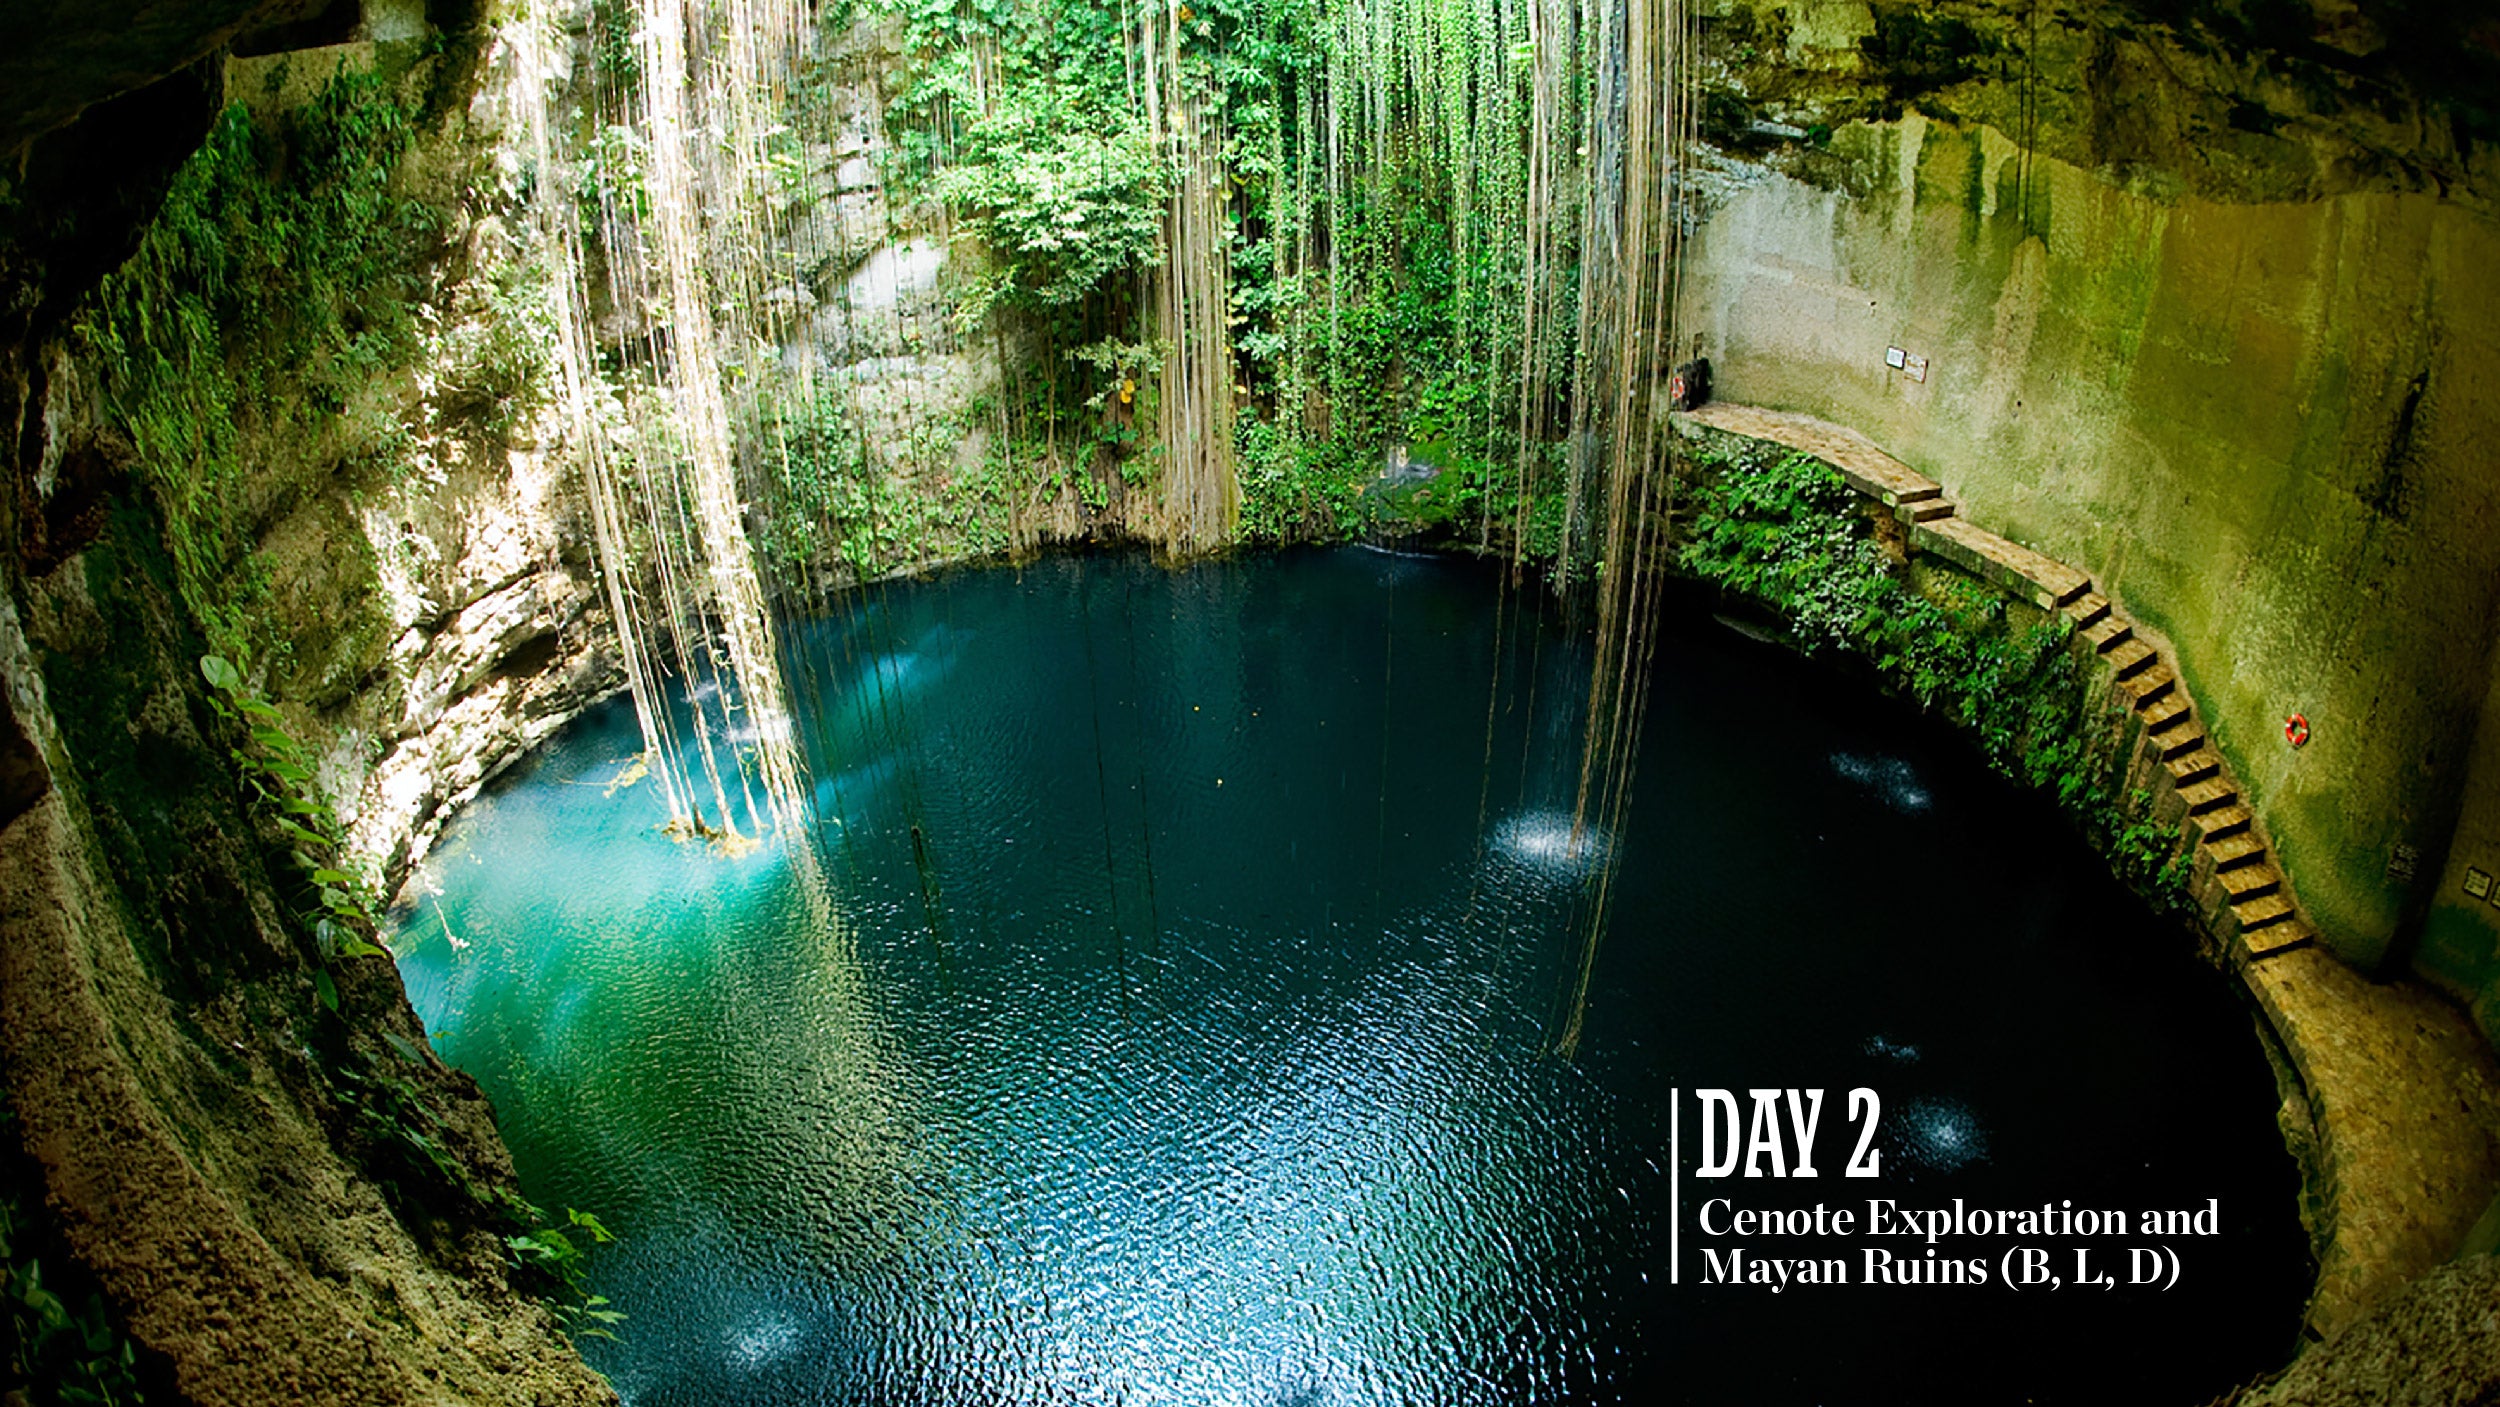 day2-Cenote-Exploration-and-Mayan-Runin (B,L,D)